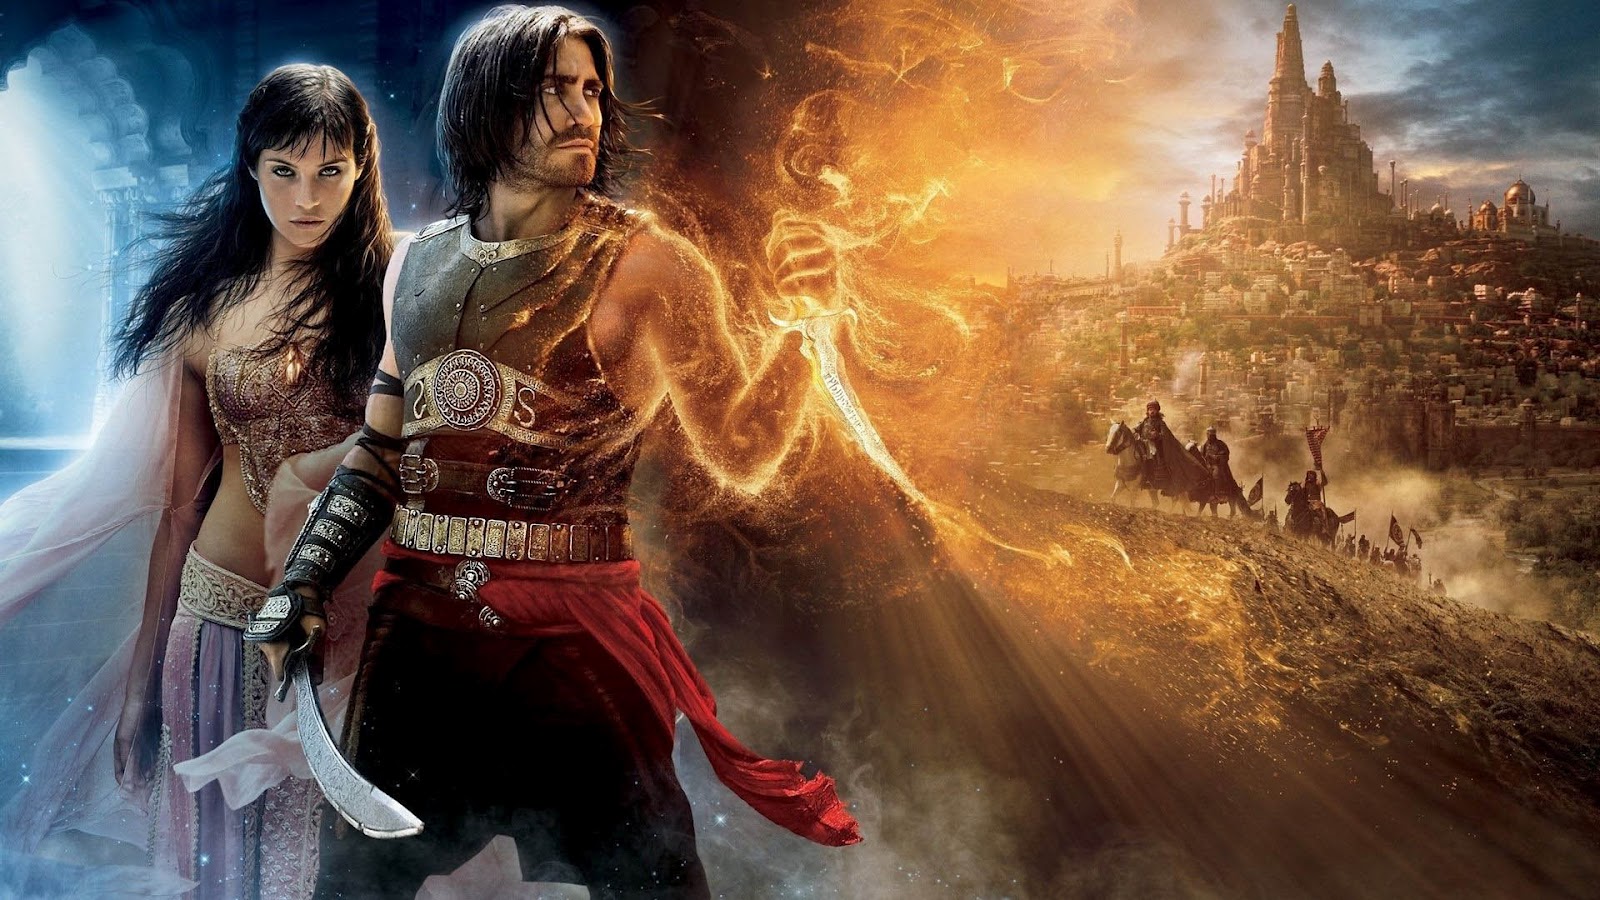 Gallery For Gt Prince Of Persia Movie Wallpaper HD